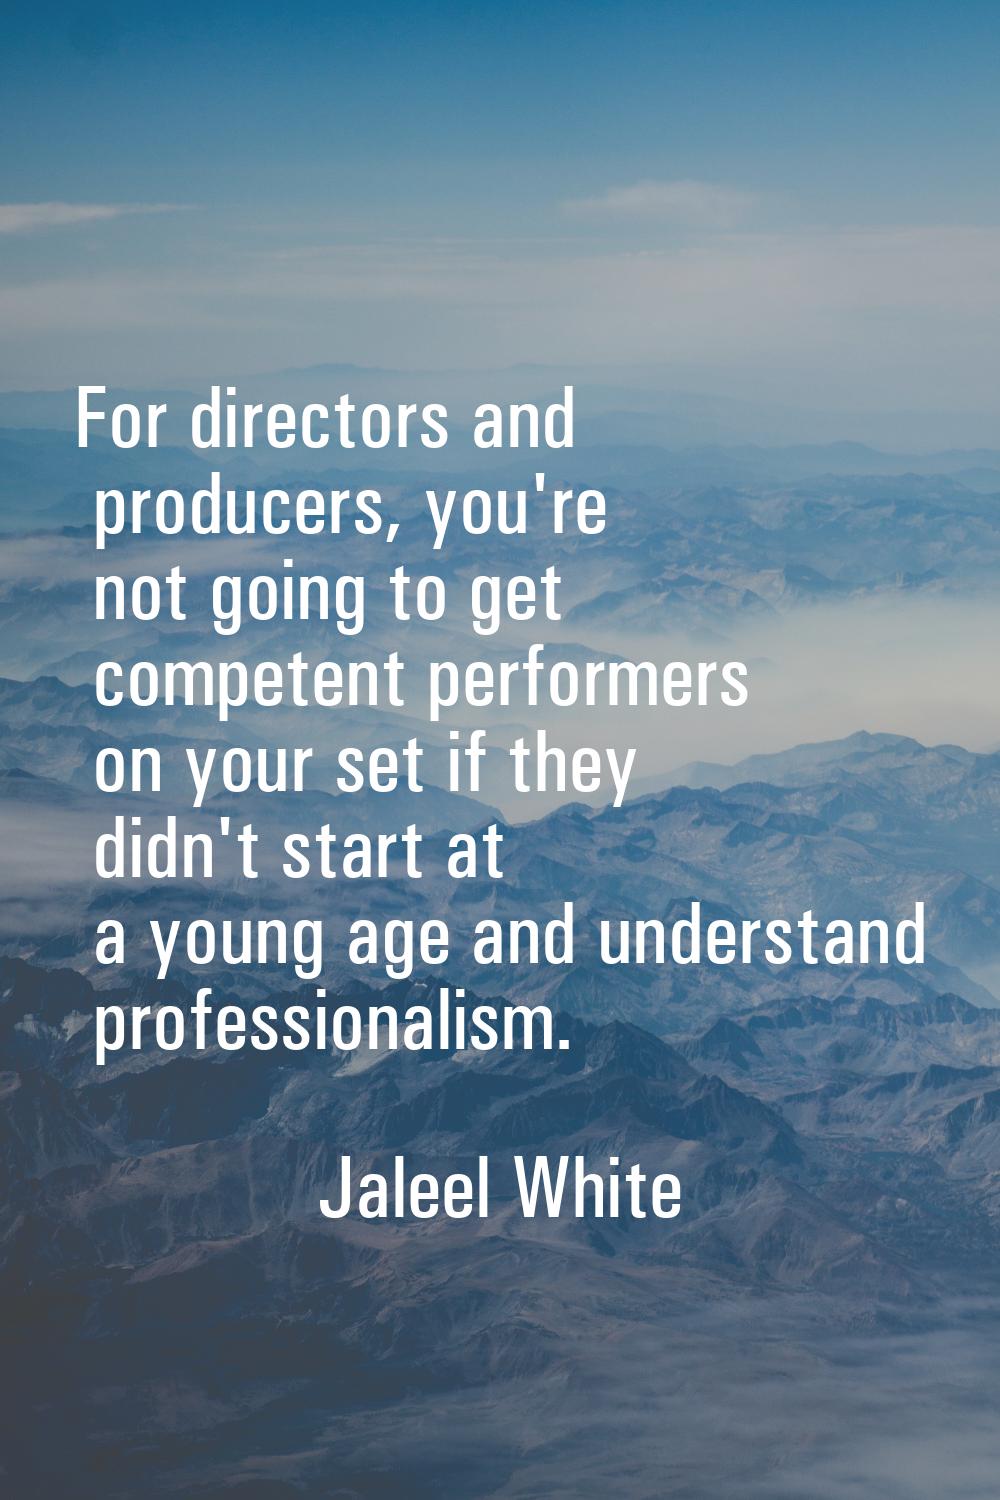 For directors and producers, you're not going to get competent performers on your set if they didn'